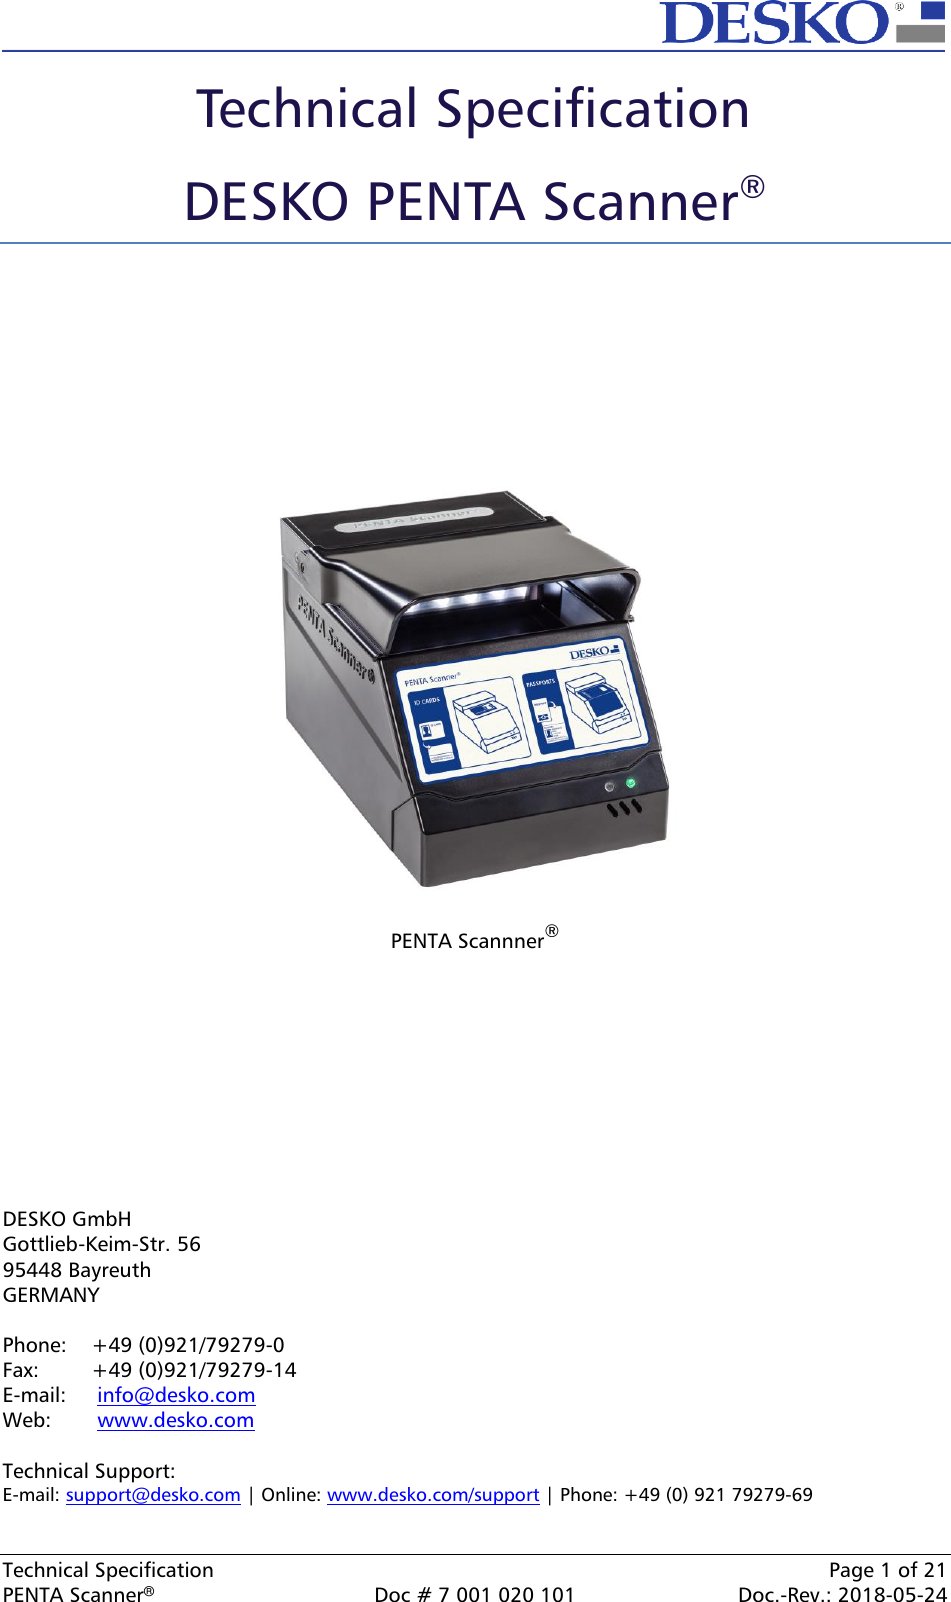  Technical Specification    Page 1 of 21 PENTA Scanner®  Doc # 7 001 020 101  Doc.-Rev.: 2018-05-24 Technical Specification  DESKO PENTA Scanner®           PENTA Scannner®           DESKO GmbH Gottlieb-Keim-Str. 56 95448 Bayreuth GERMANY  Phone:   +49 (0)921/79279-0 Fax:   +49 (0)921/79279-14 E-mail:   info@desko.com  Web:   www.desko.com   Technical Support: E-mail: support@desko.com | Online: www.desko.com/support | Phone: +49 (0) 921 79279-69   